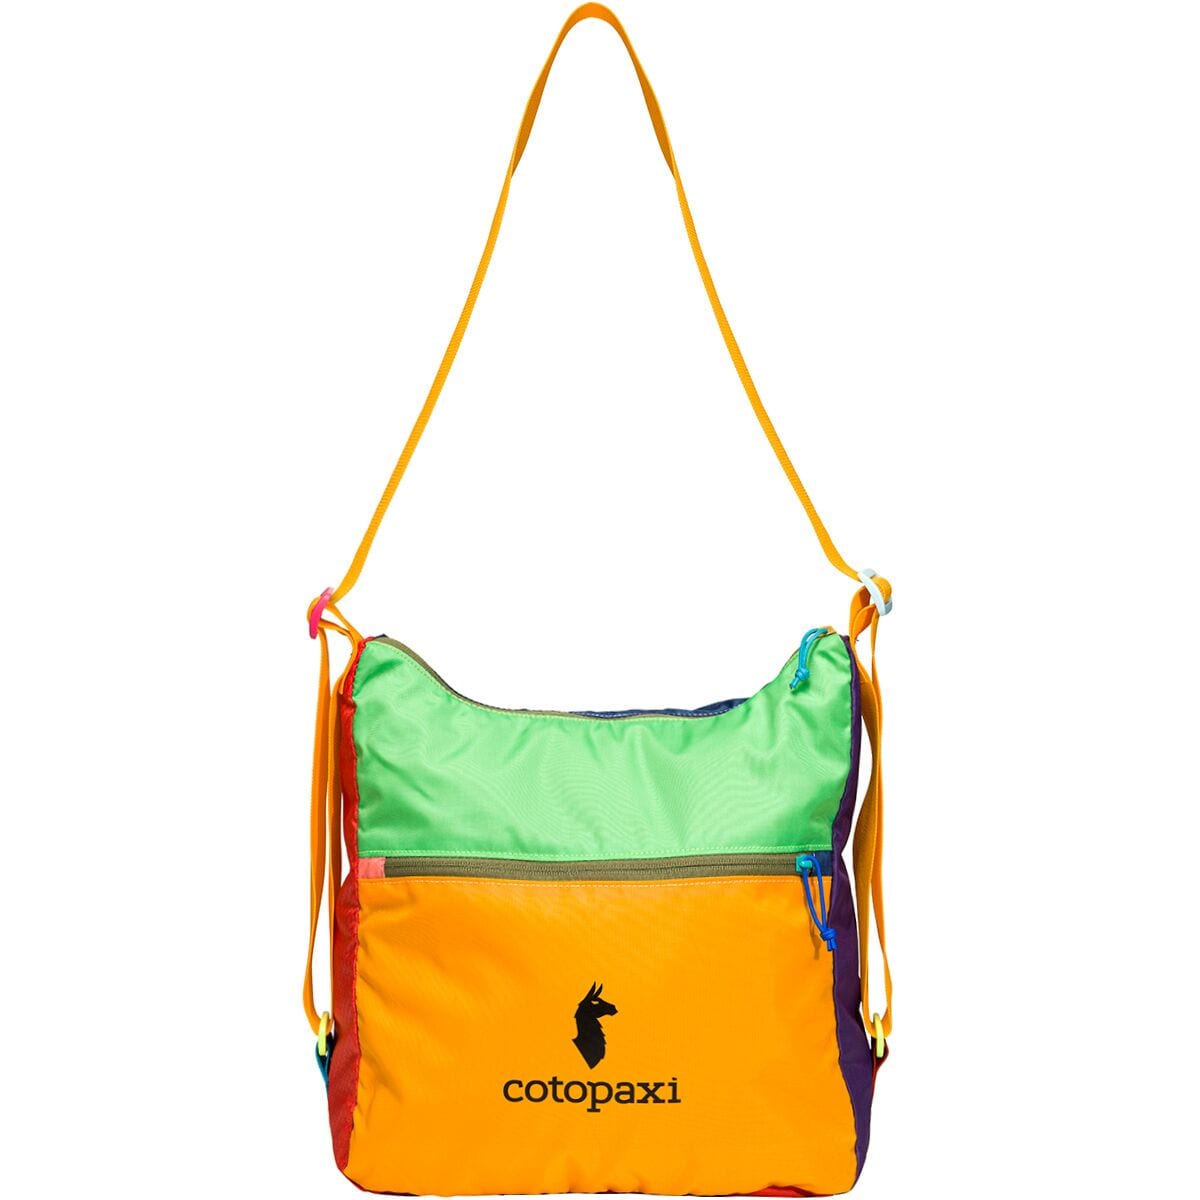 Cotopaxi's Taal Convertible Tote has beautifully saturated colors